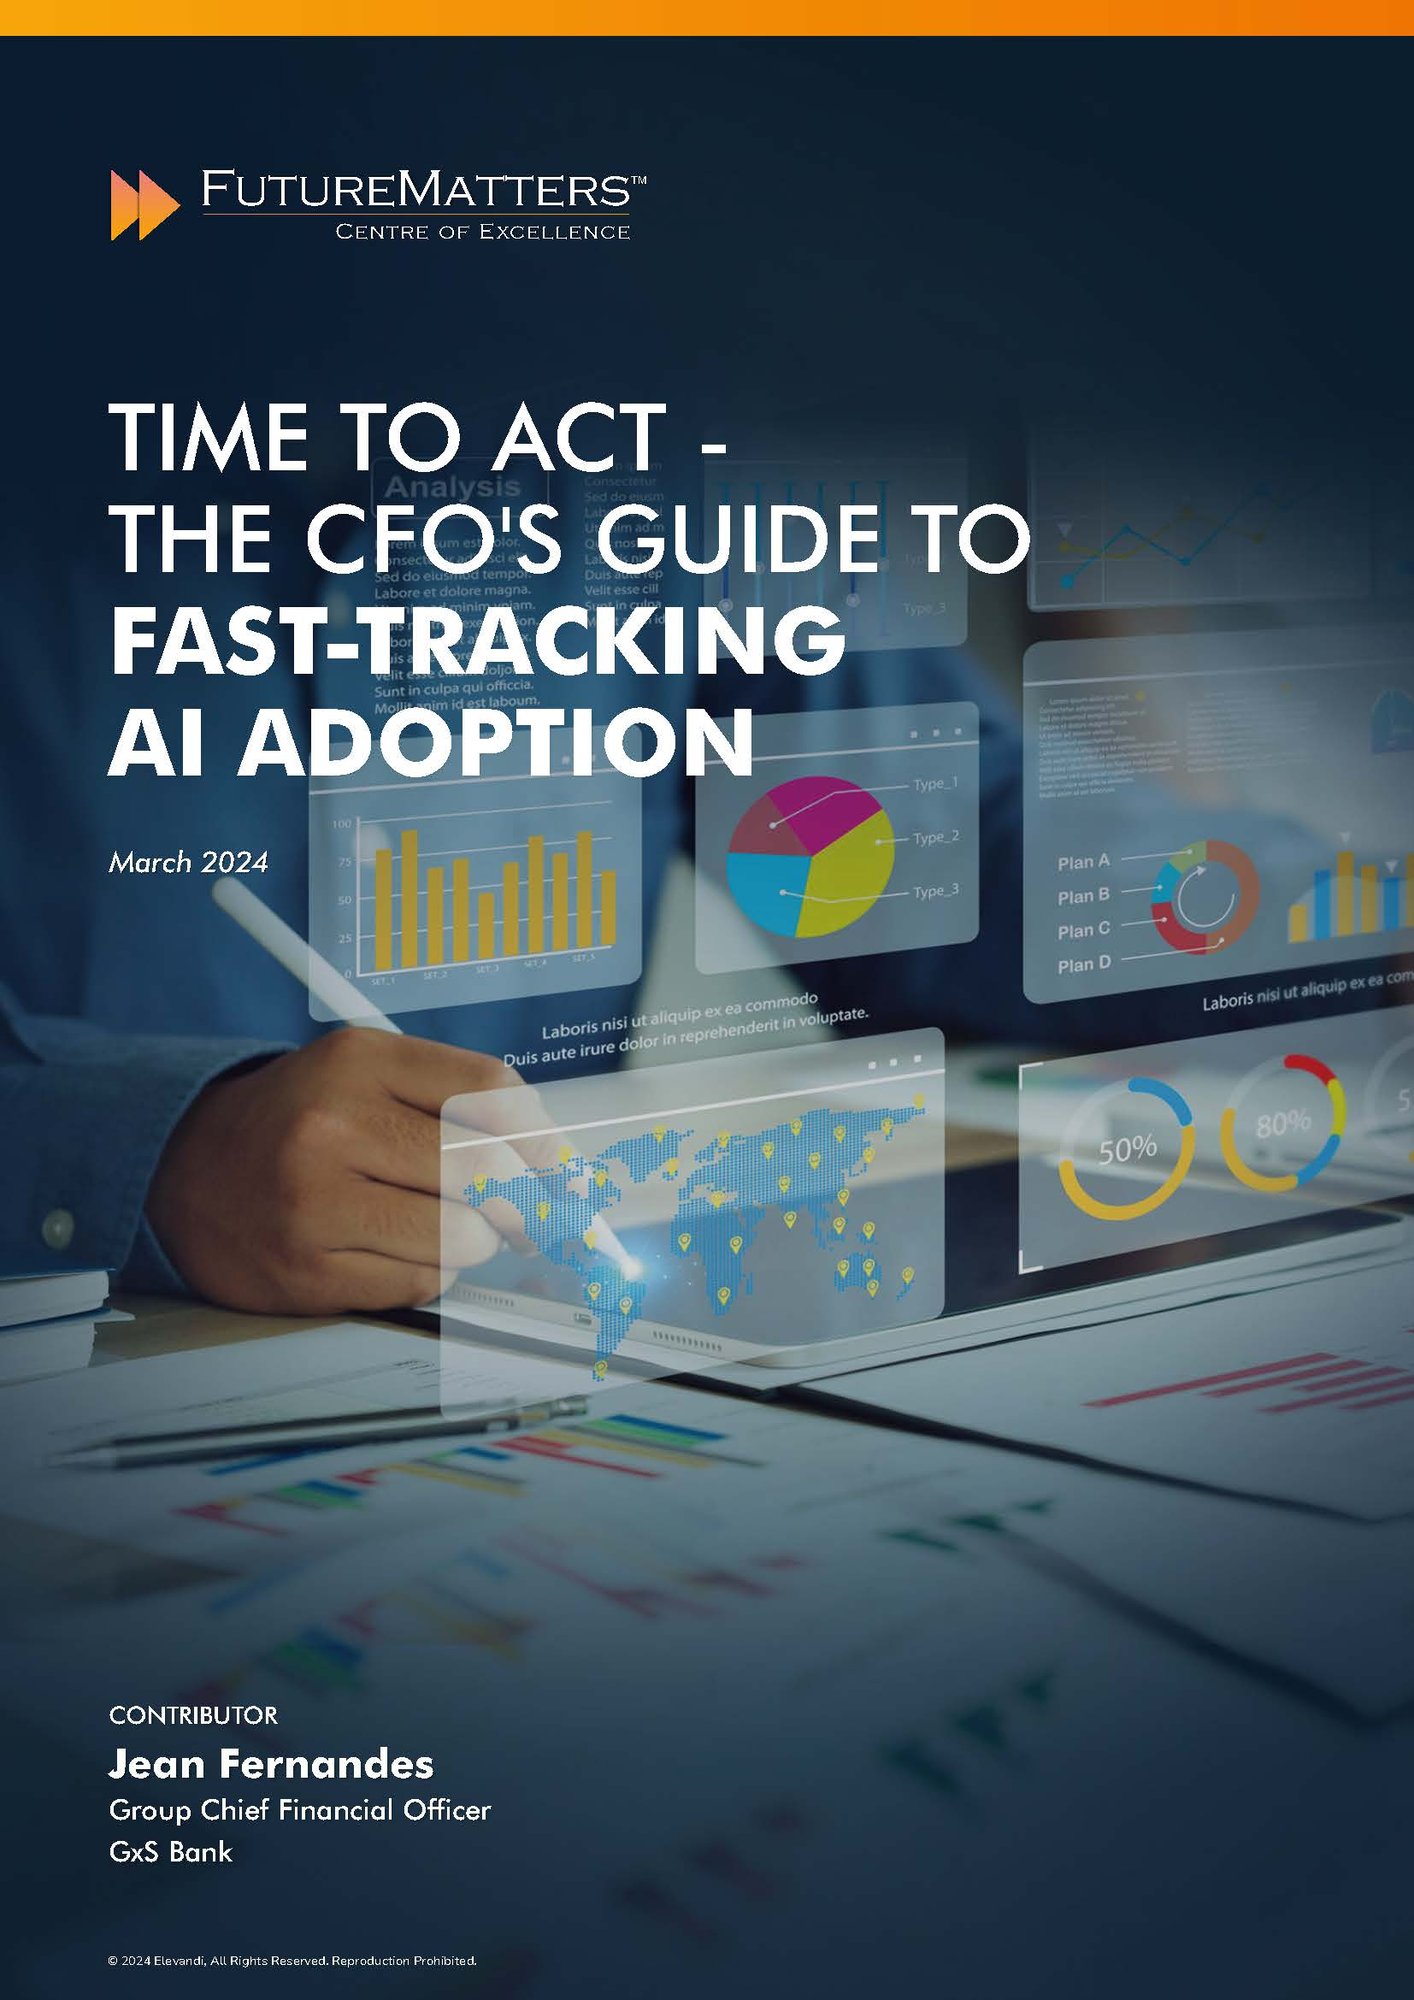 Time to Act-The CFOs Guide to Fast-Tracking AI adoption - Jean Fernandes - March 2024 (1)_Page_1